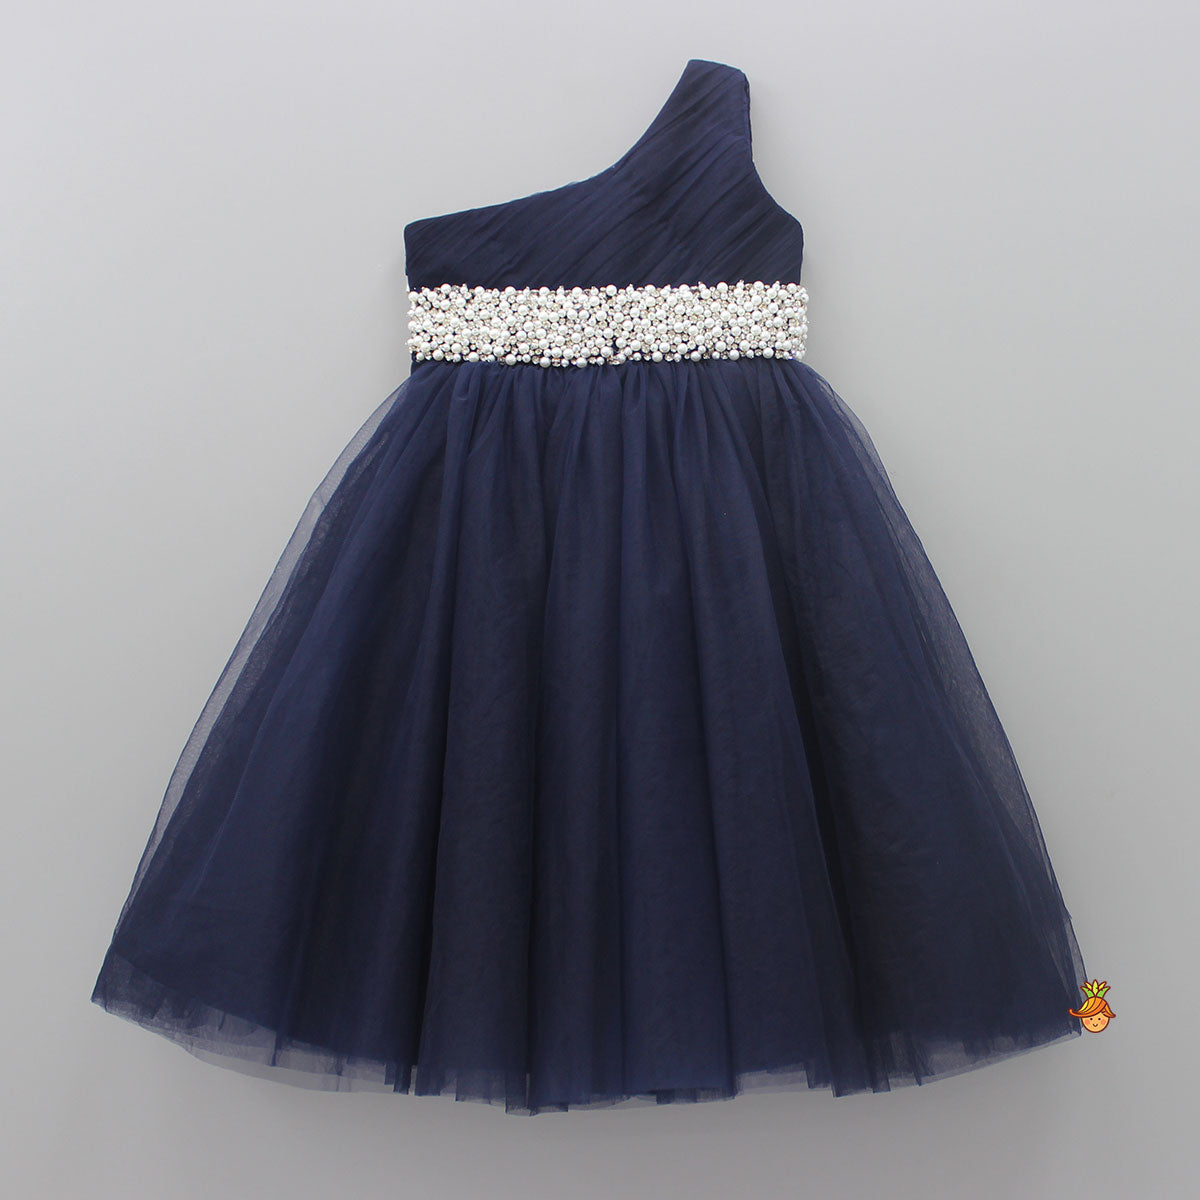 Stunning Pearls And White Stones Embellished Navy Blue Gown